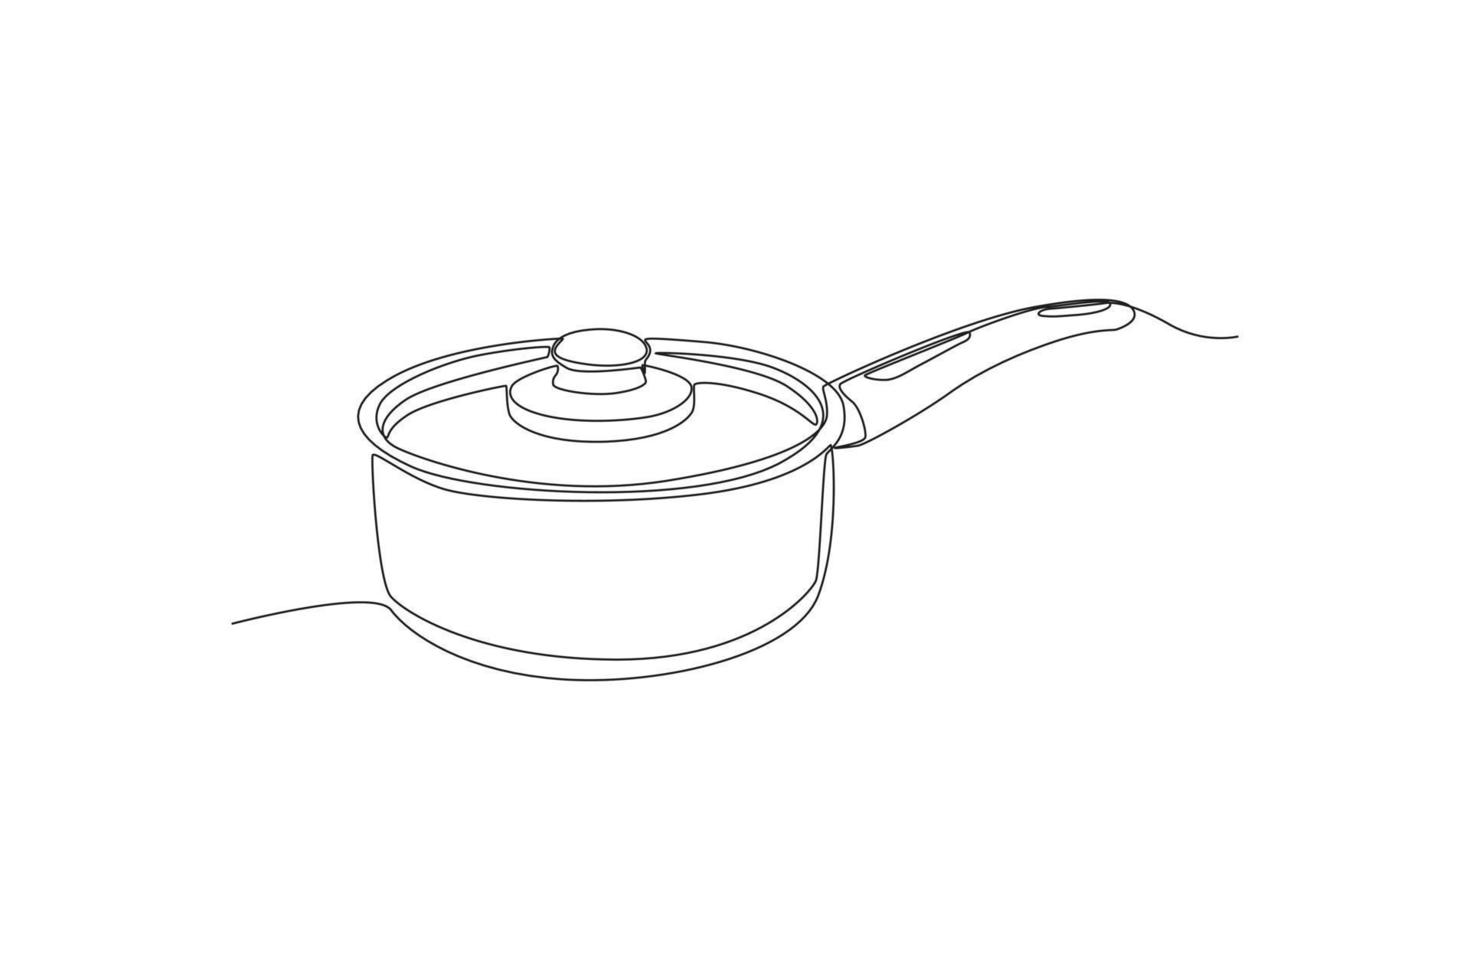 Continuous one line drawing saucepan with lid. Kitchen appliances concept. Single line draw design vector graphic illustration.